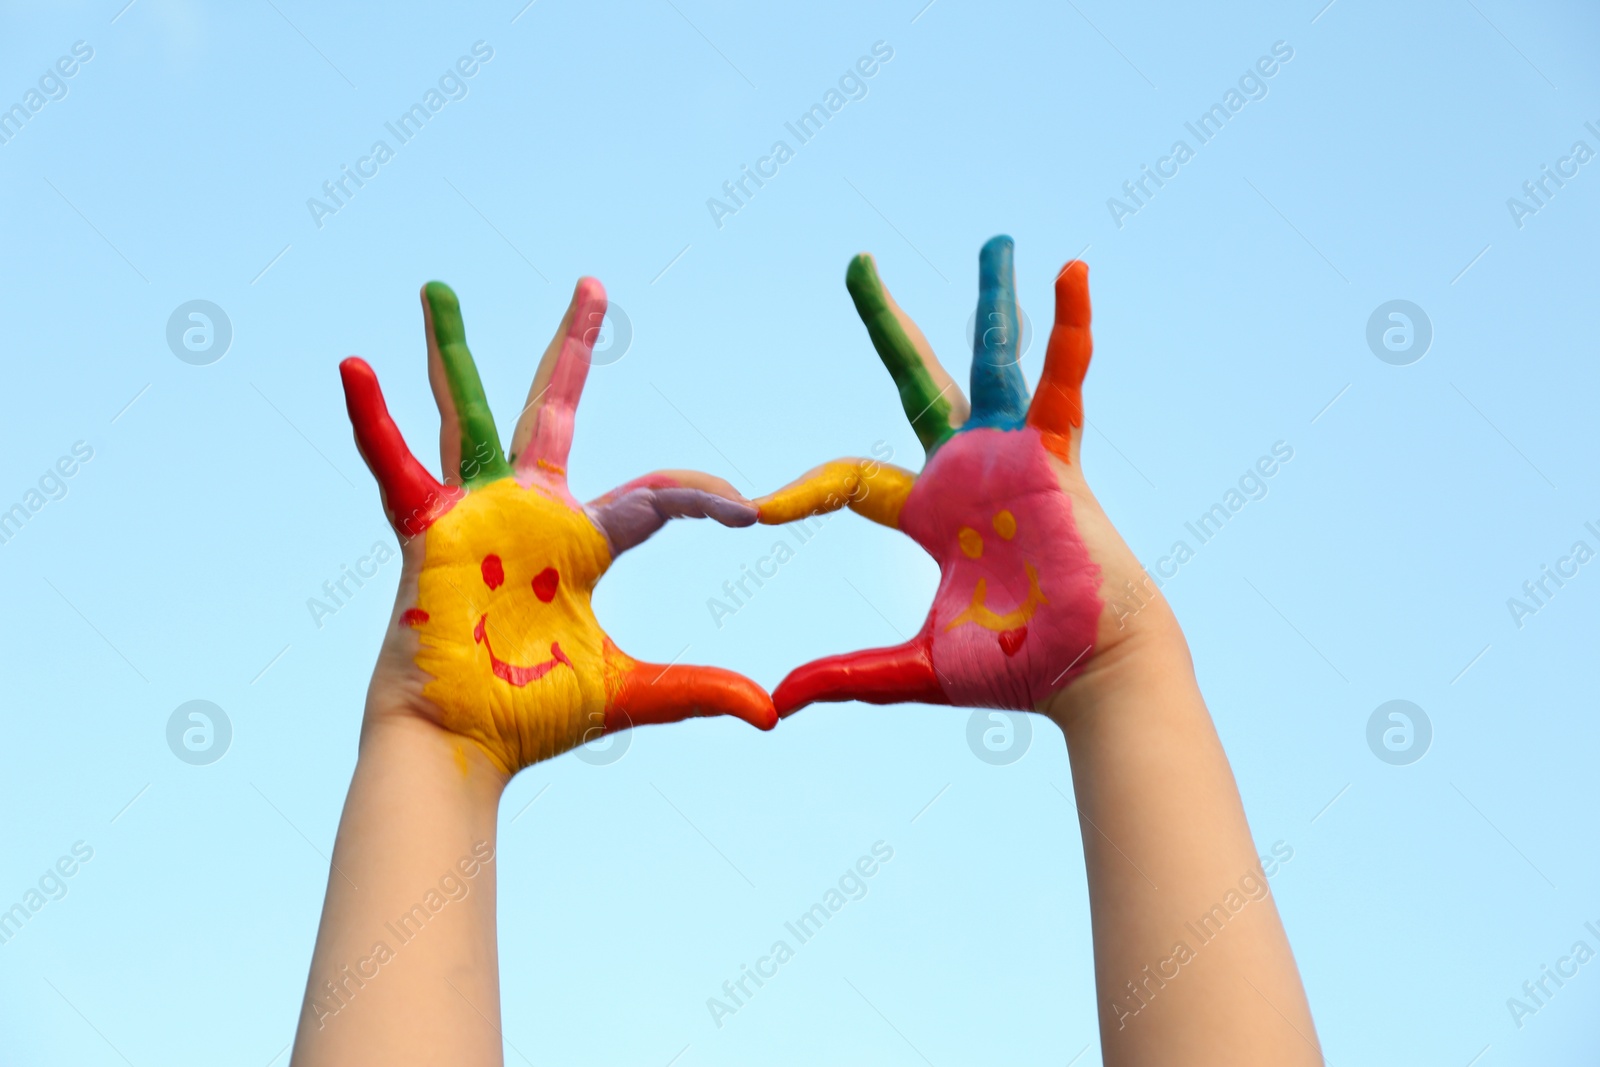 Photo of Kid with smiling face drawn on palms against blue sky, closeup